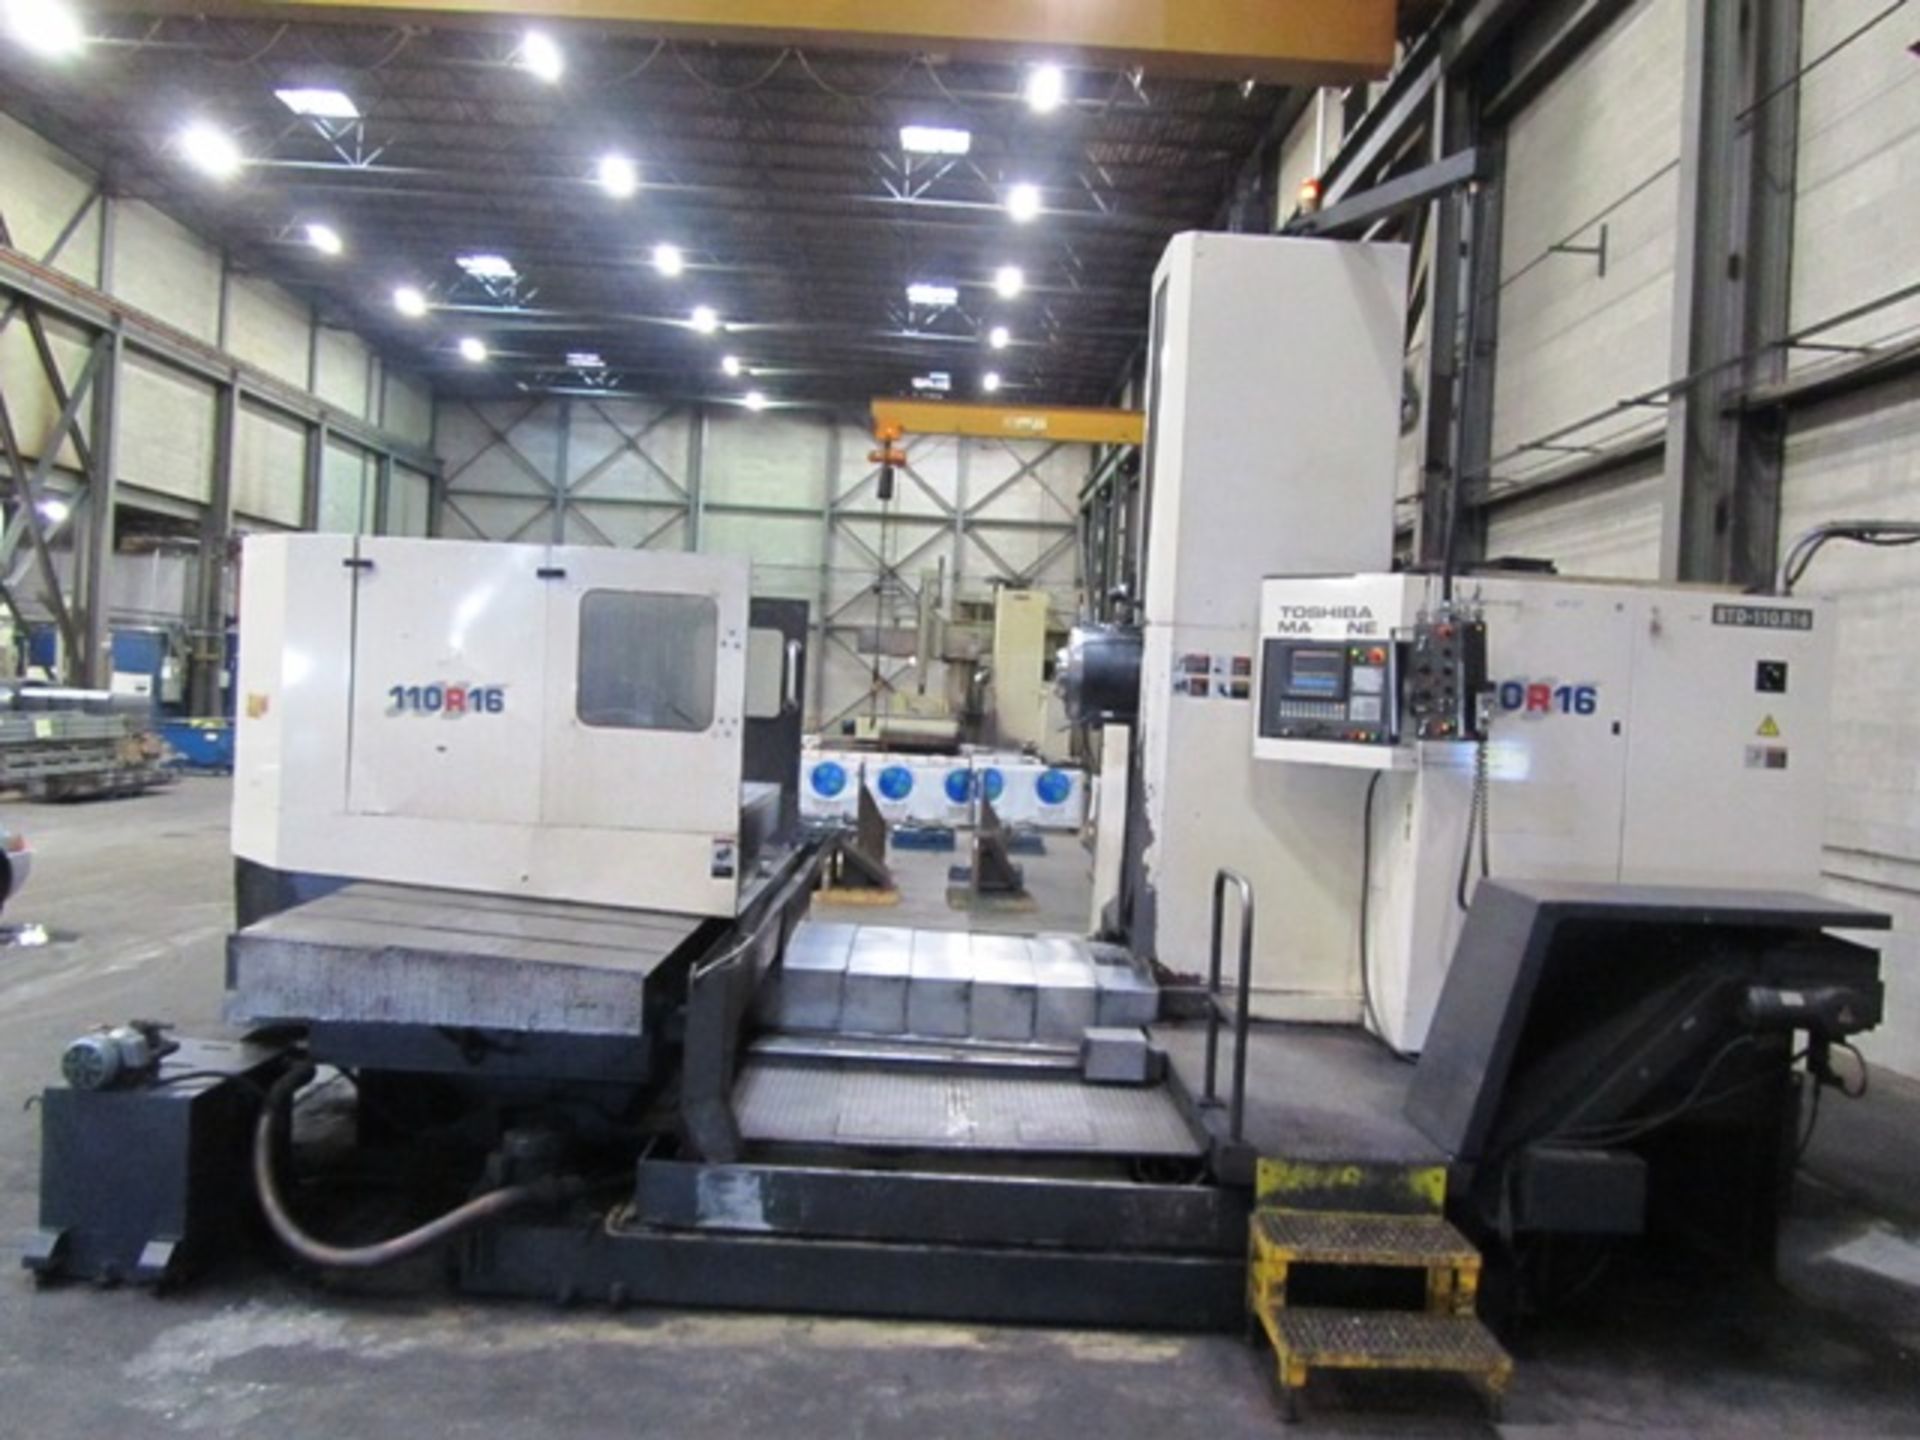 Toshiba BTD-110.R16 4.33'' CNC Table Type Horizontal Boring Mill with 38-ATC, 78.74'' X-Axis, 70. - Image 4 of 8